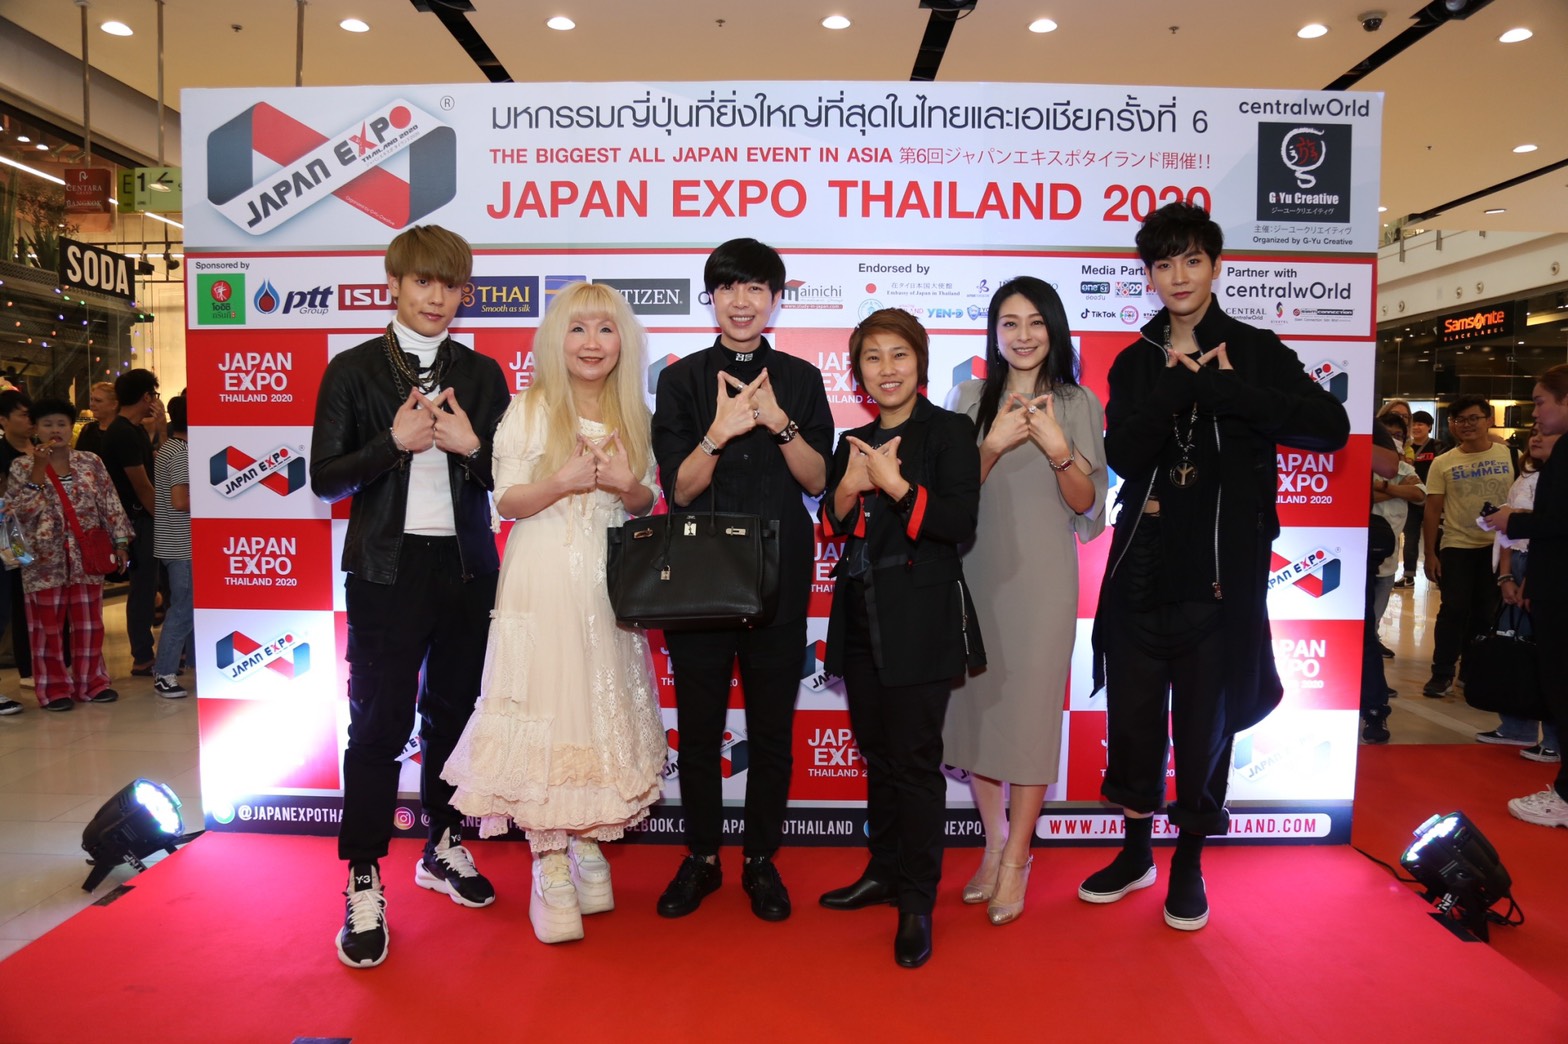 JAPAN EXPO THAILAND 2020 Press Conference